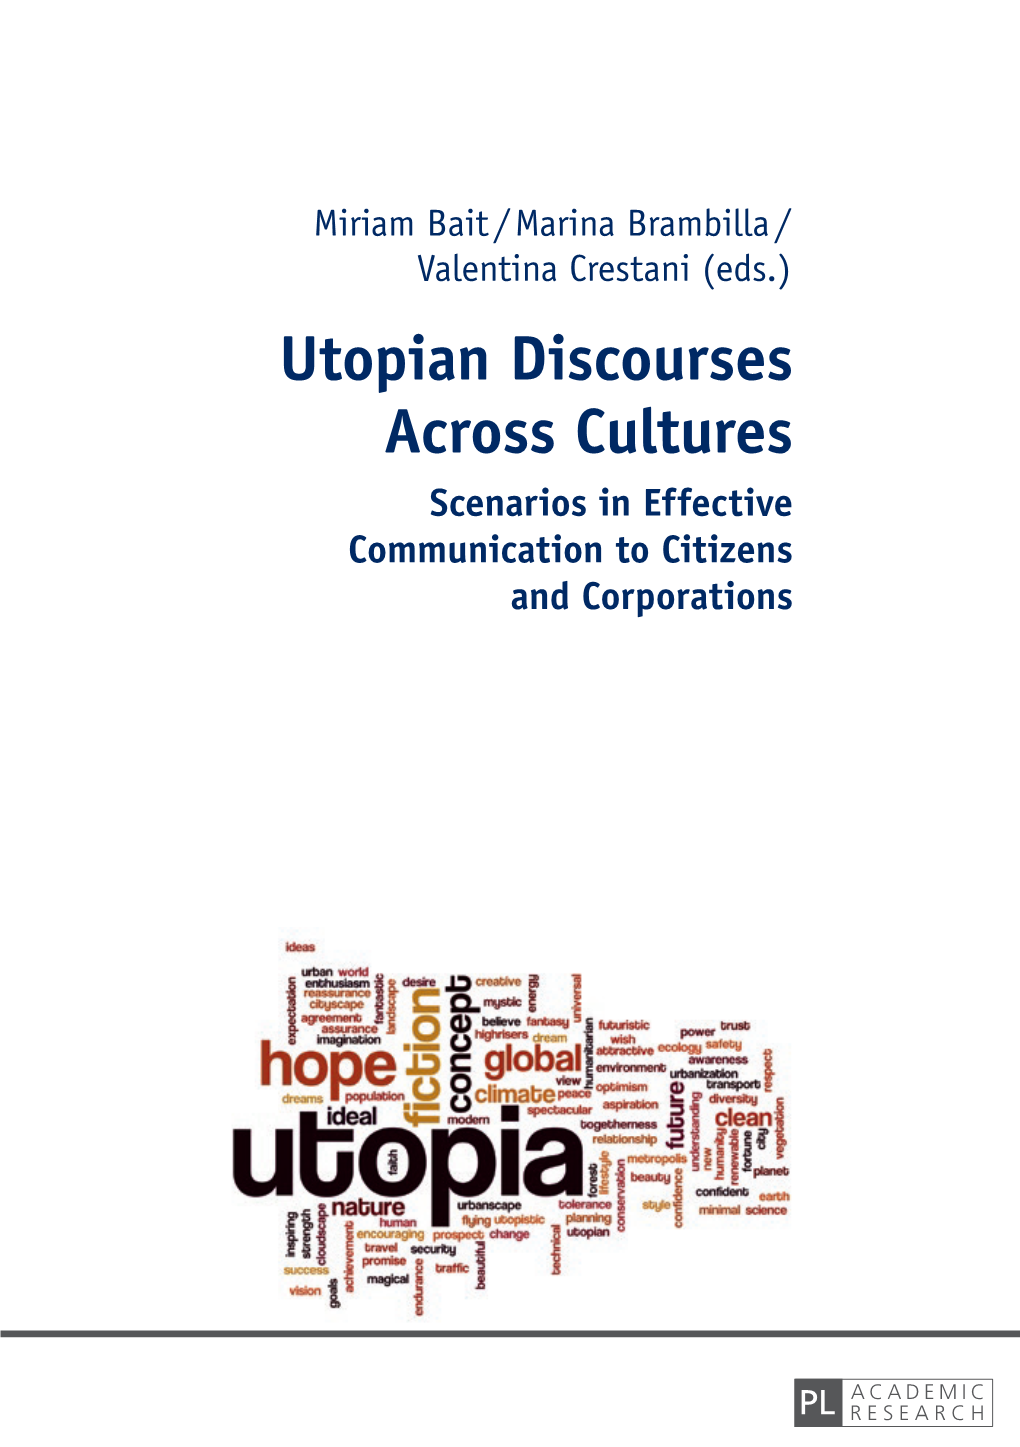 Utopian Discourses Across Cultures the Term Utopia, Coined by Thomas More in 1516, Contains an Inherent Semantic Ambi- Brambilla